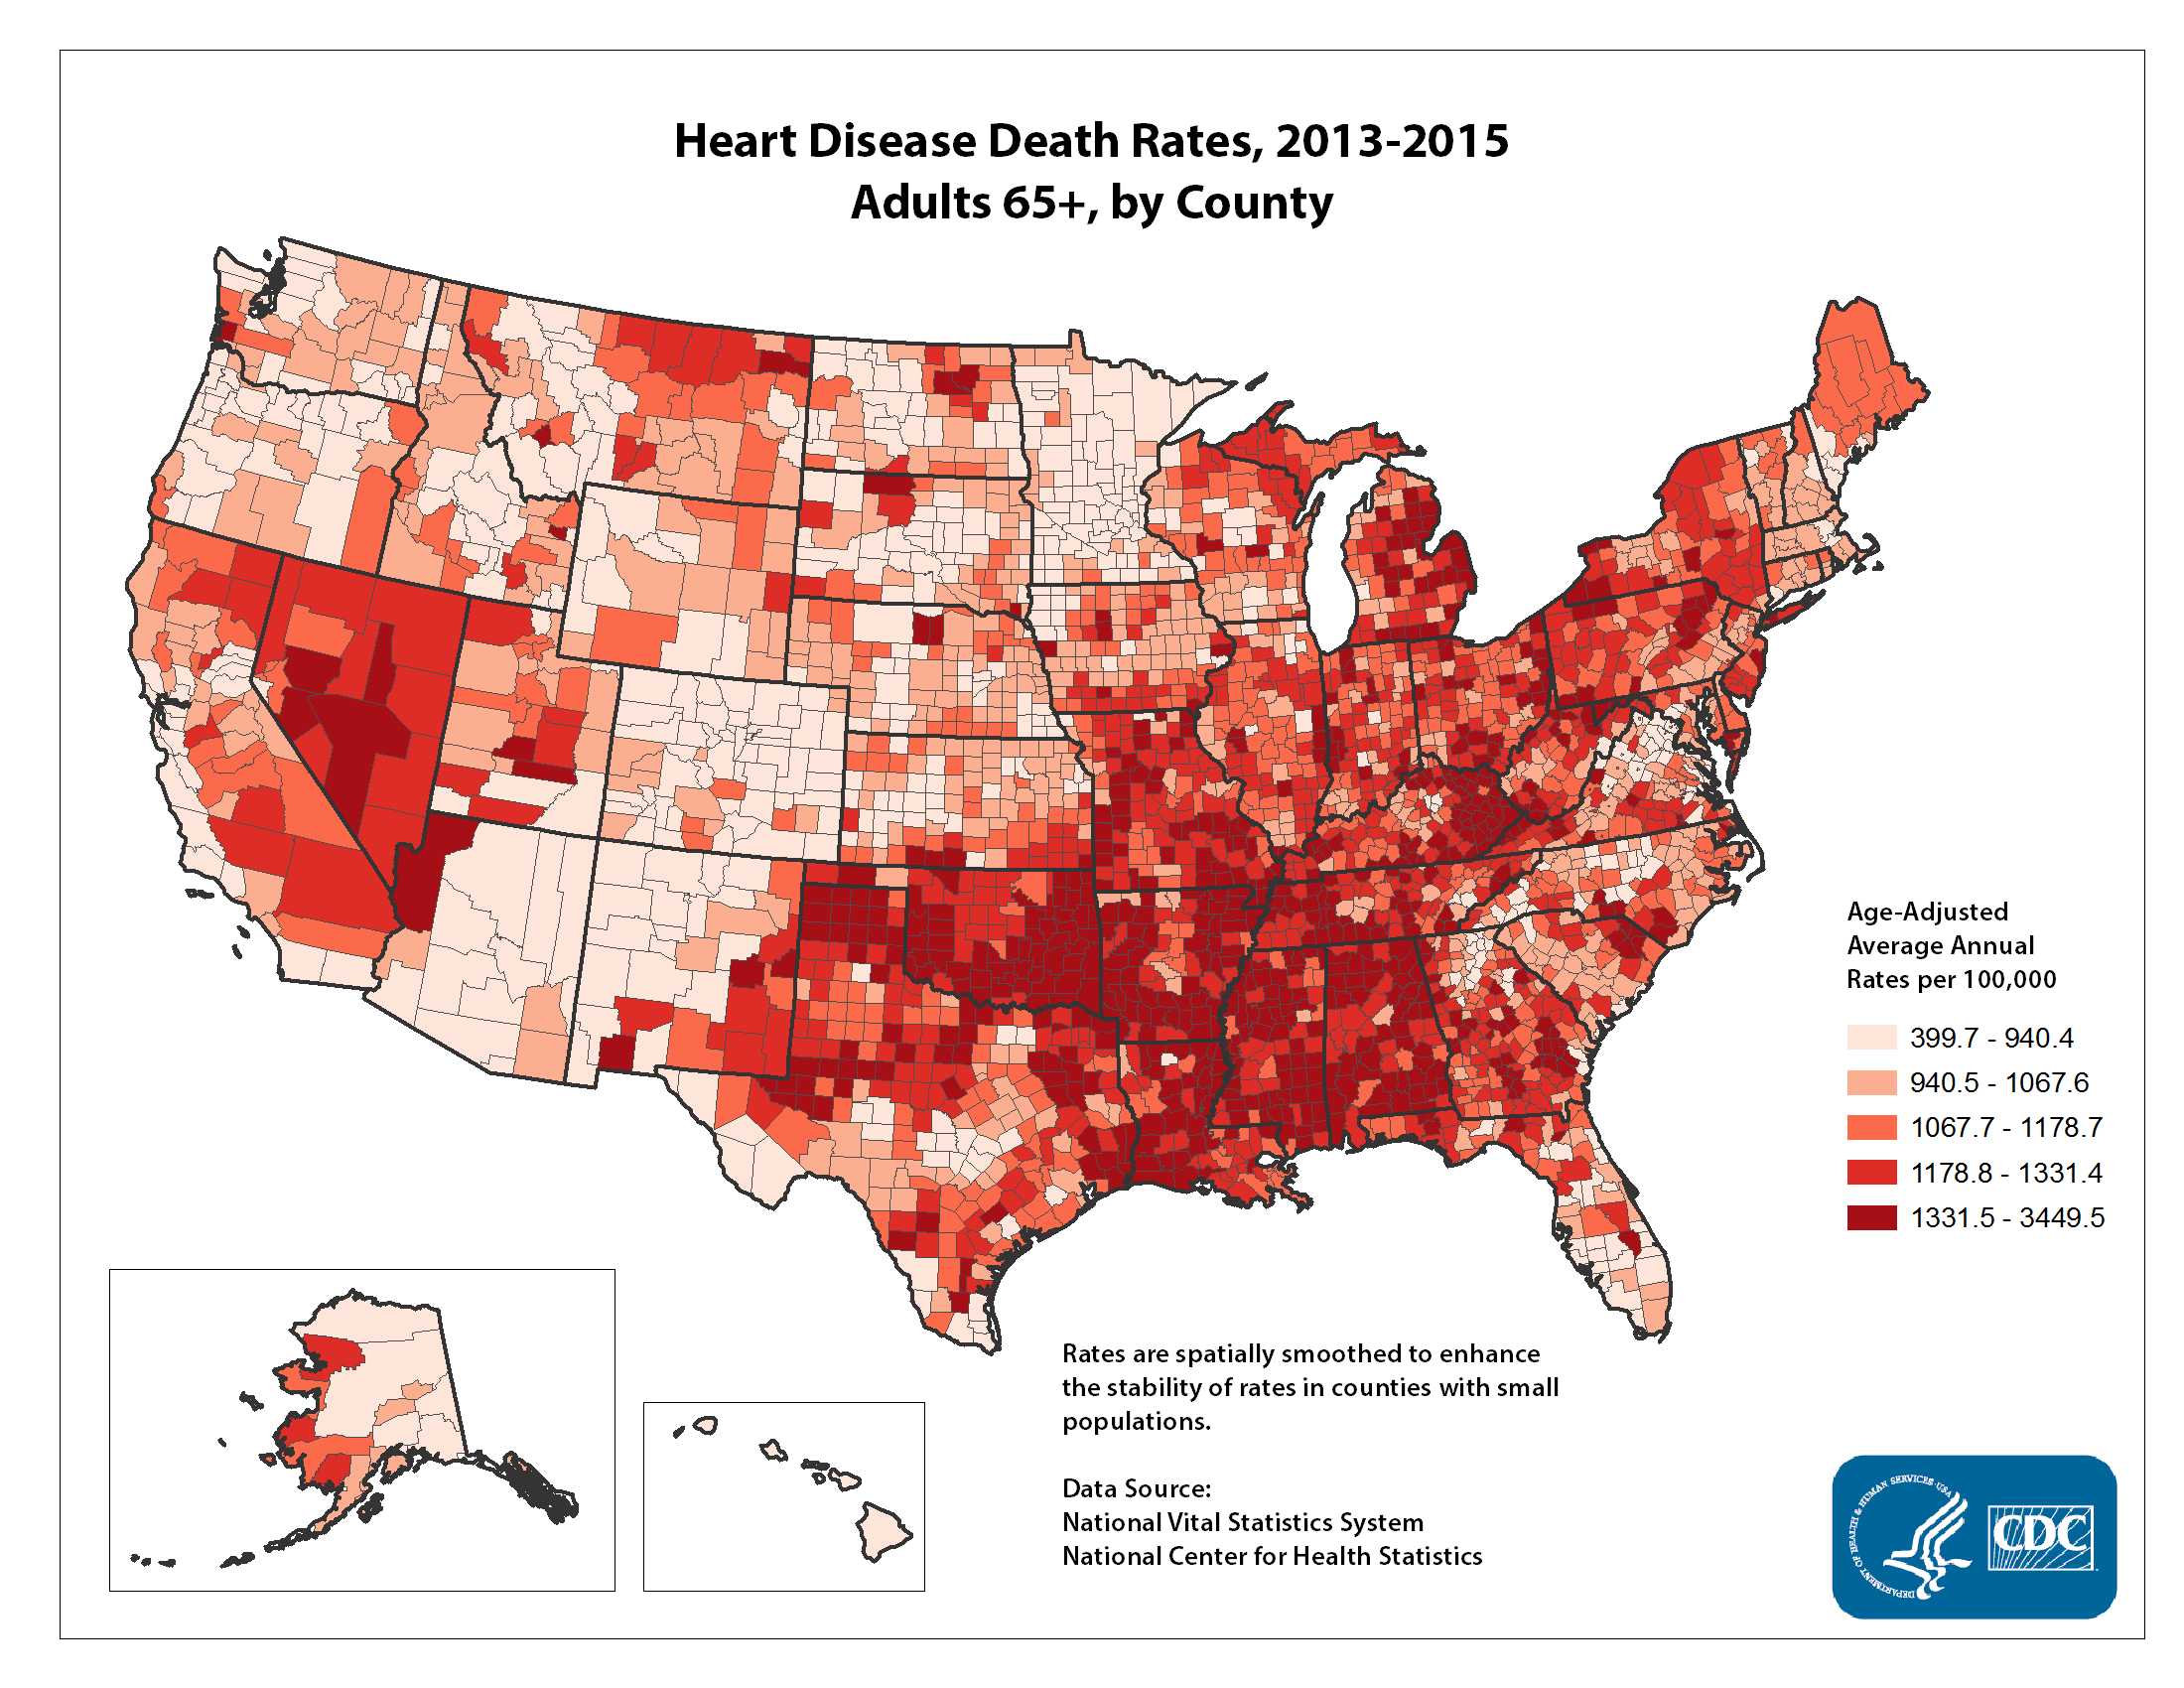 Heart Disease Death Rates for 2012 through 2014 for Adults Aged 65 Years and Older by County. The map shows that concentrations of counties with the highest heart disease death rates - meaning the top quintile - are located primarily in Mississippi, Oklahoma, Arkansas, Louisiana, and Alabama.  Pockets of high-rate counties also were found in New York, Michigan, West Virginia, Kentucky, Tennessee, Georgia, Missouri, and Nevada.